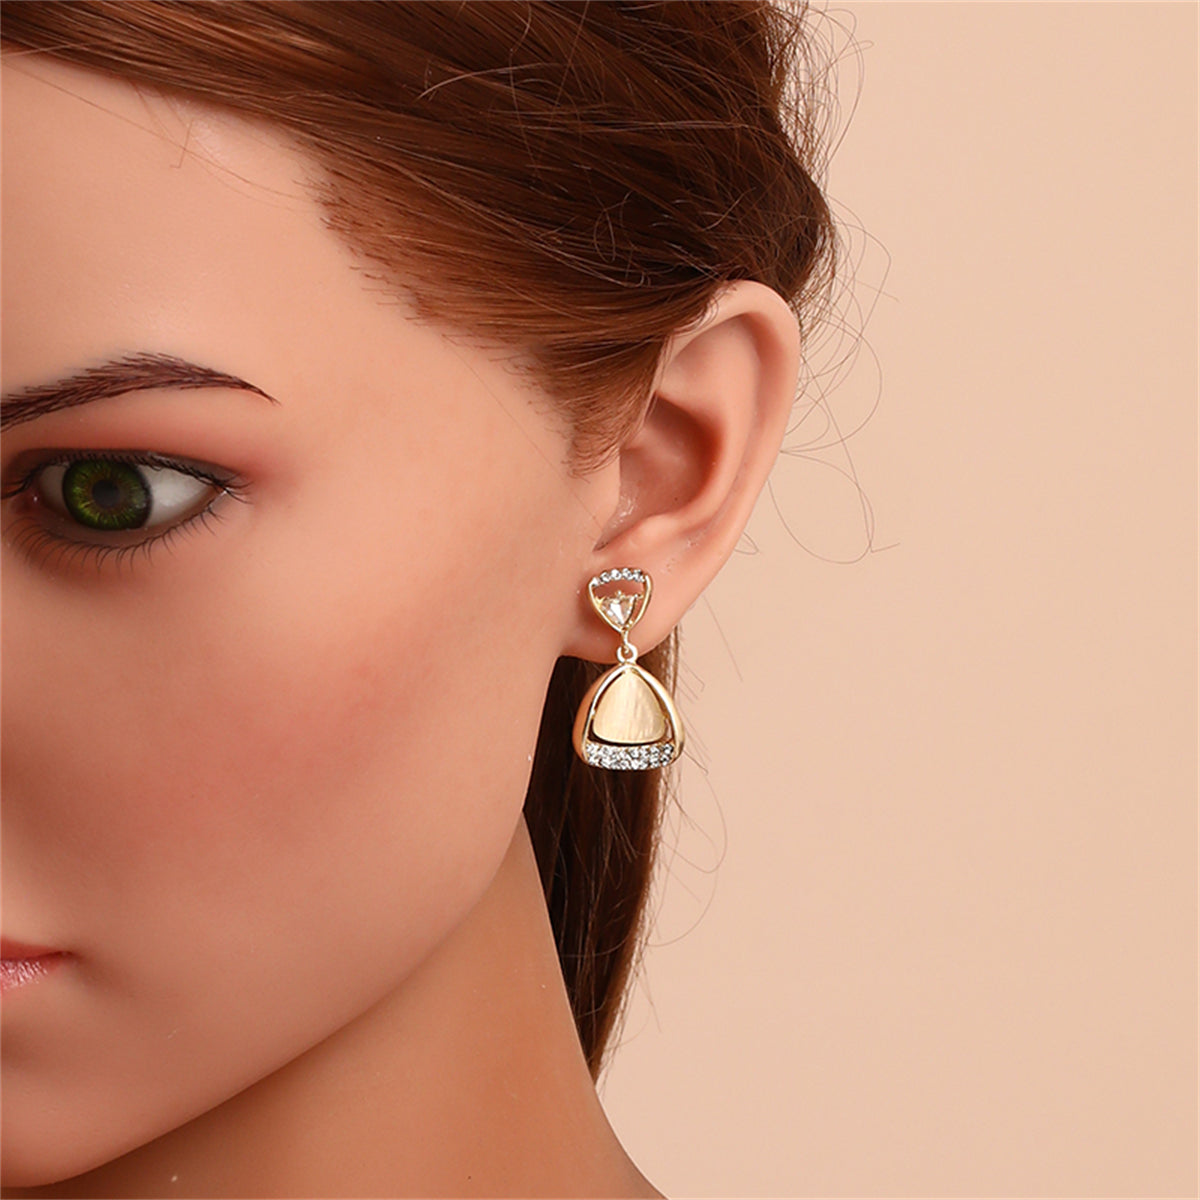 Cats Eye & Crystal 18K Gold-Plated Triangle Drop Earrings